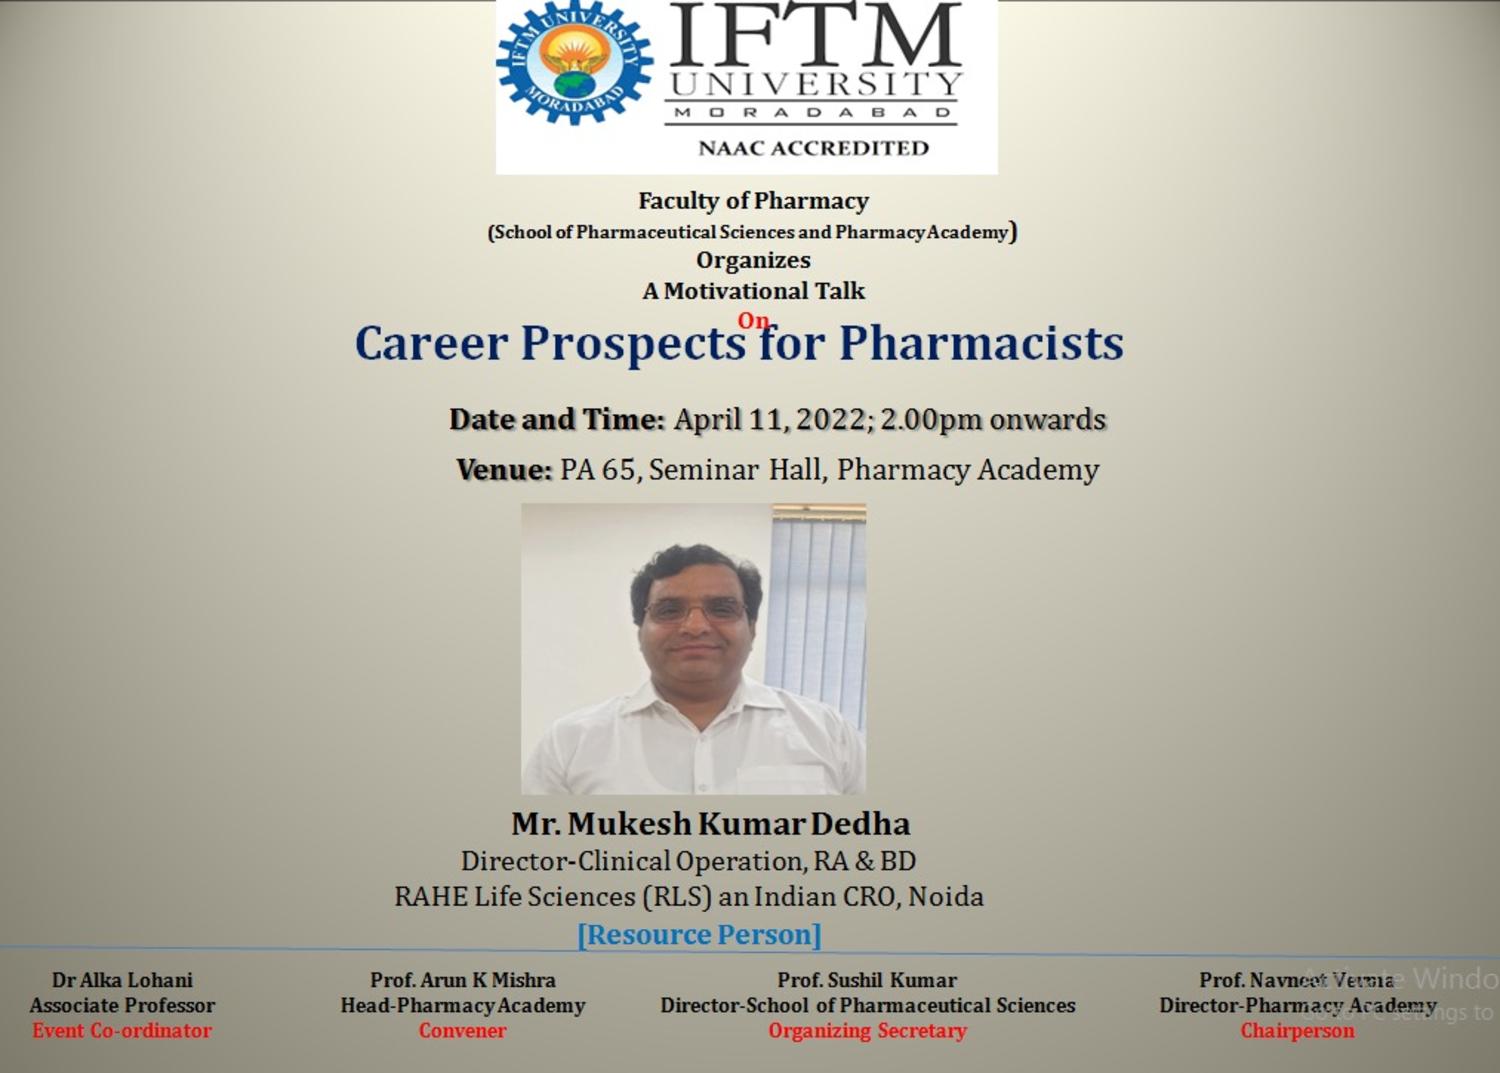 A Motivational Talk on Career Prospects for Pharmacists